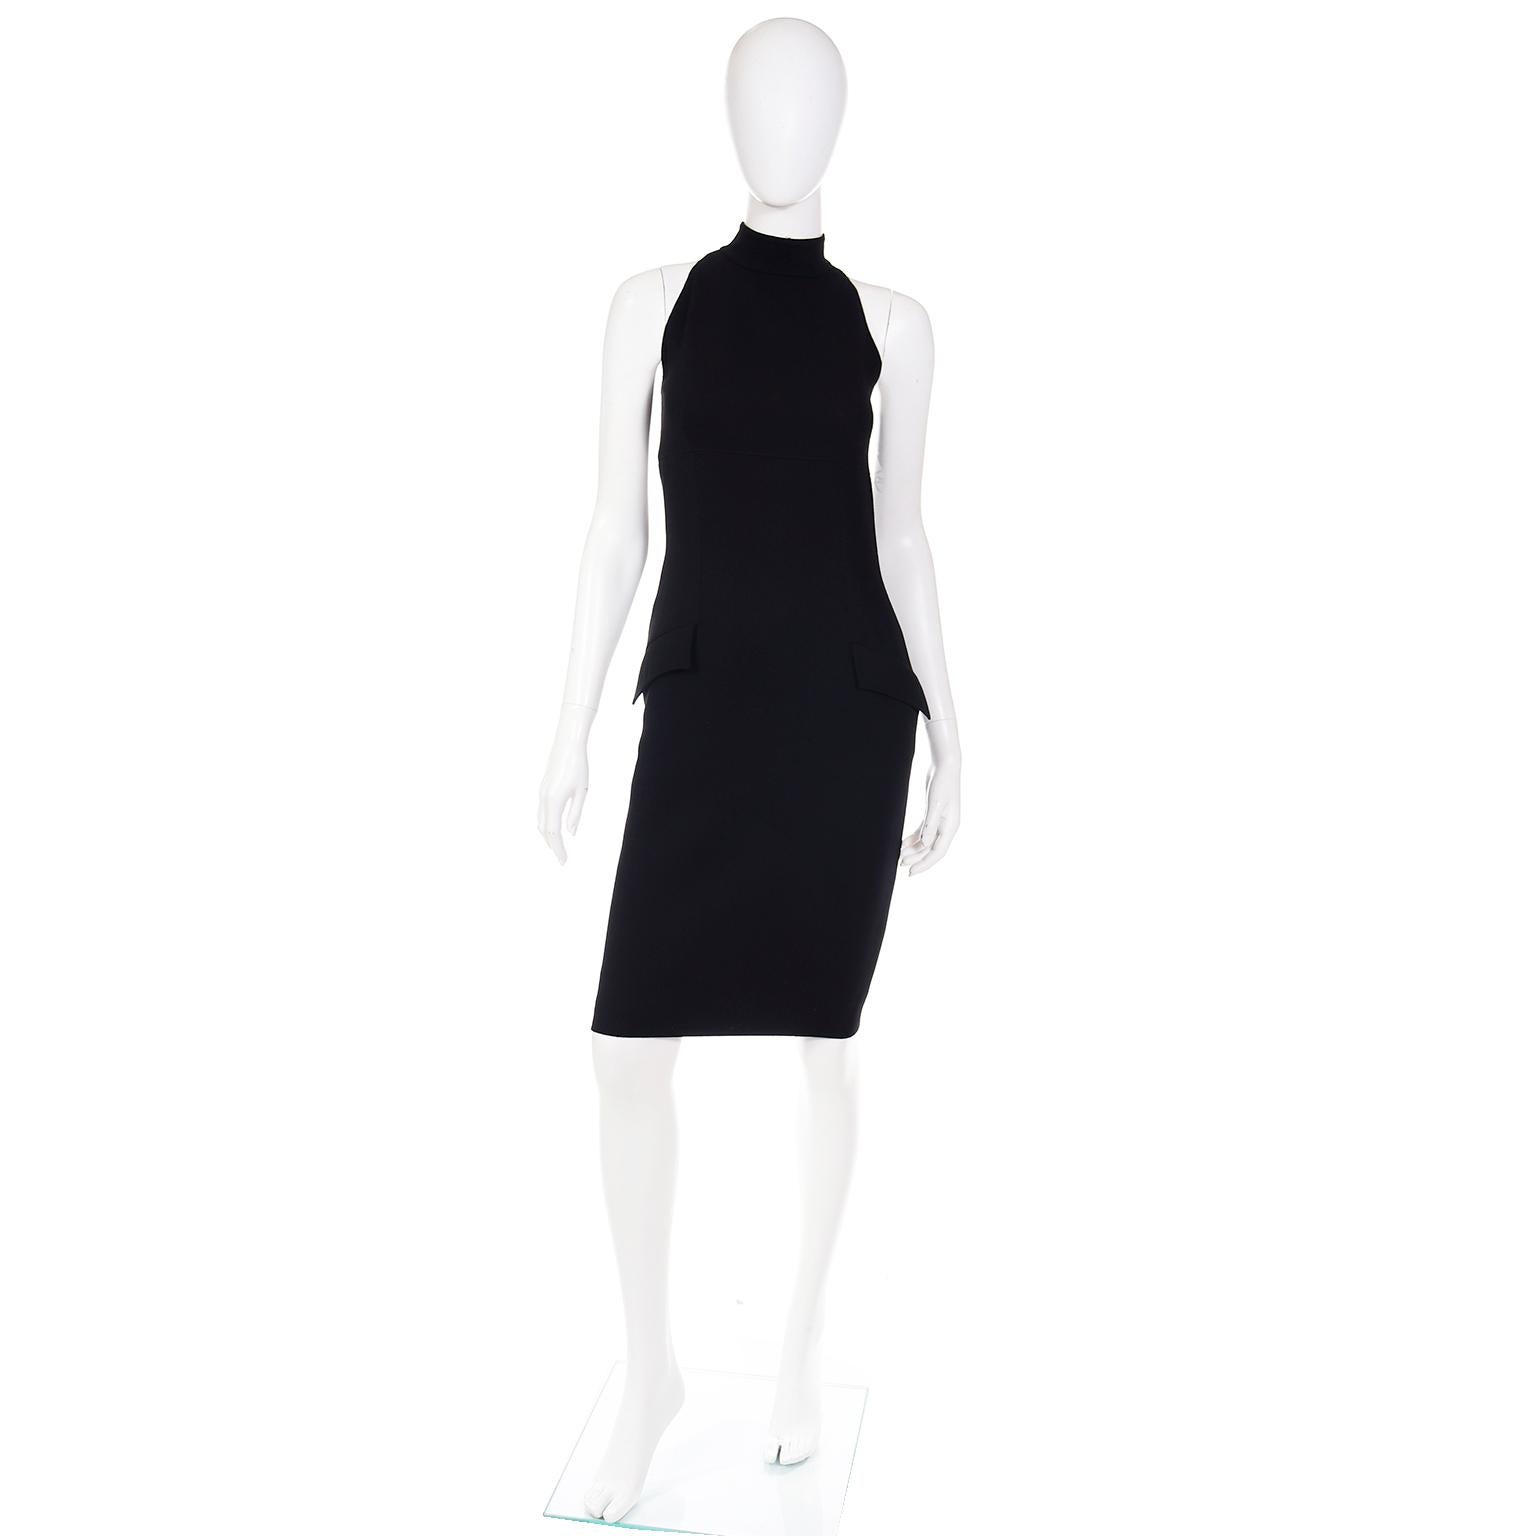 This is such an incredible vintage Valentino boutique black crepe sleeveless bodycon dress with faux side flap pockets and a center back zipper with rhinestones that unzips from both the top and bottom. This beautiful mock turtleneck dress is fully